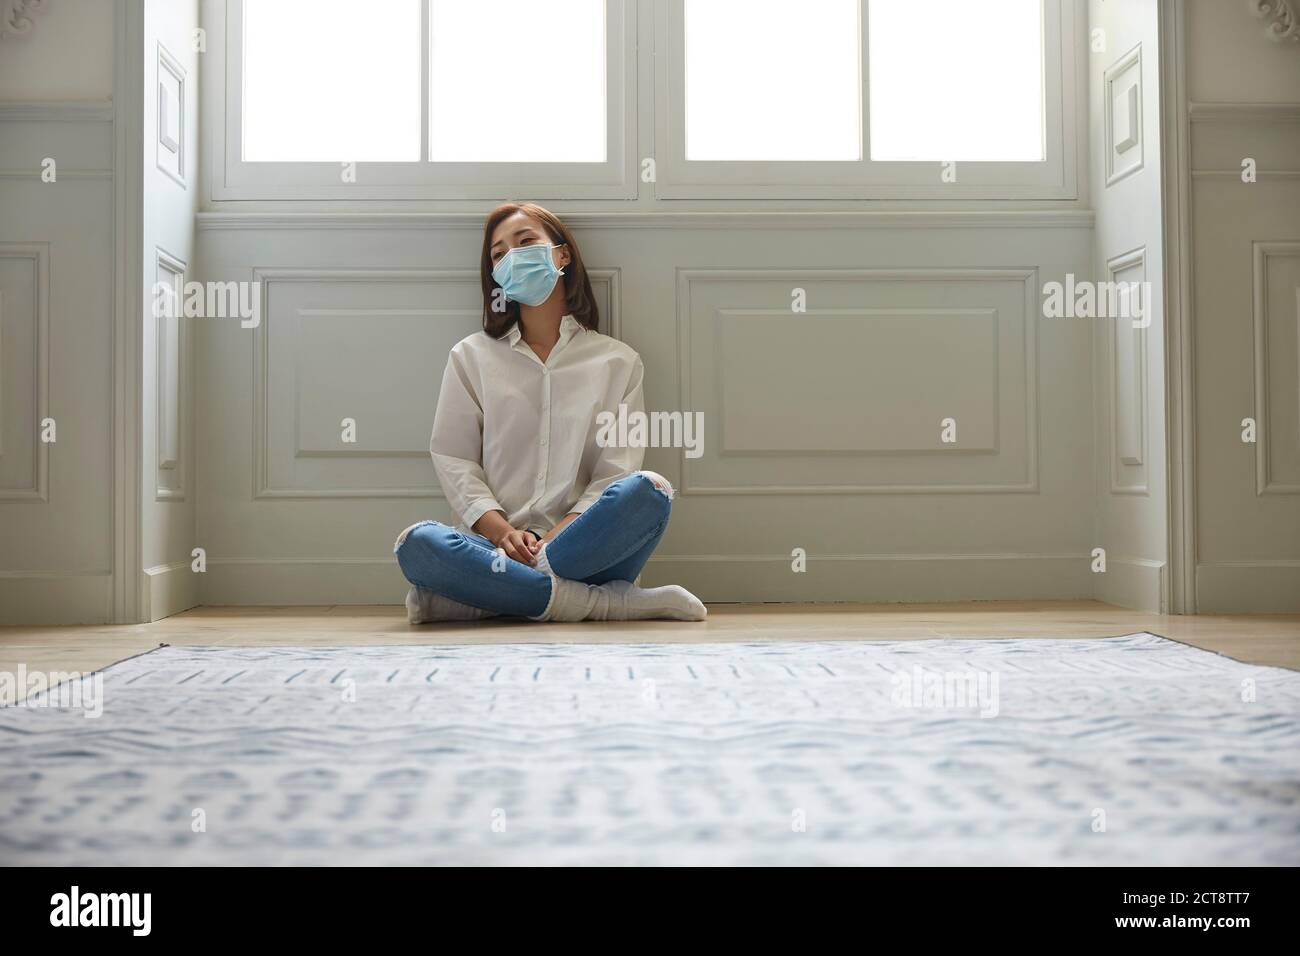 young asian woman in quarantine at home wearing facial mask sitting on floor legs crossed looking sad and depressed Stock Photo